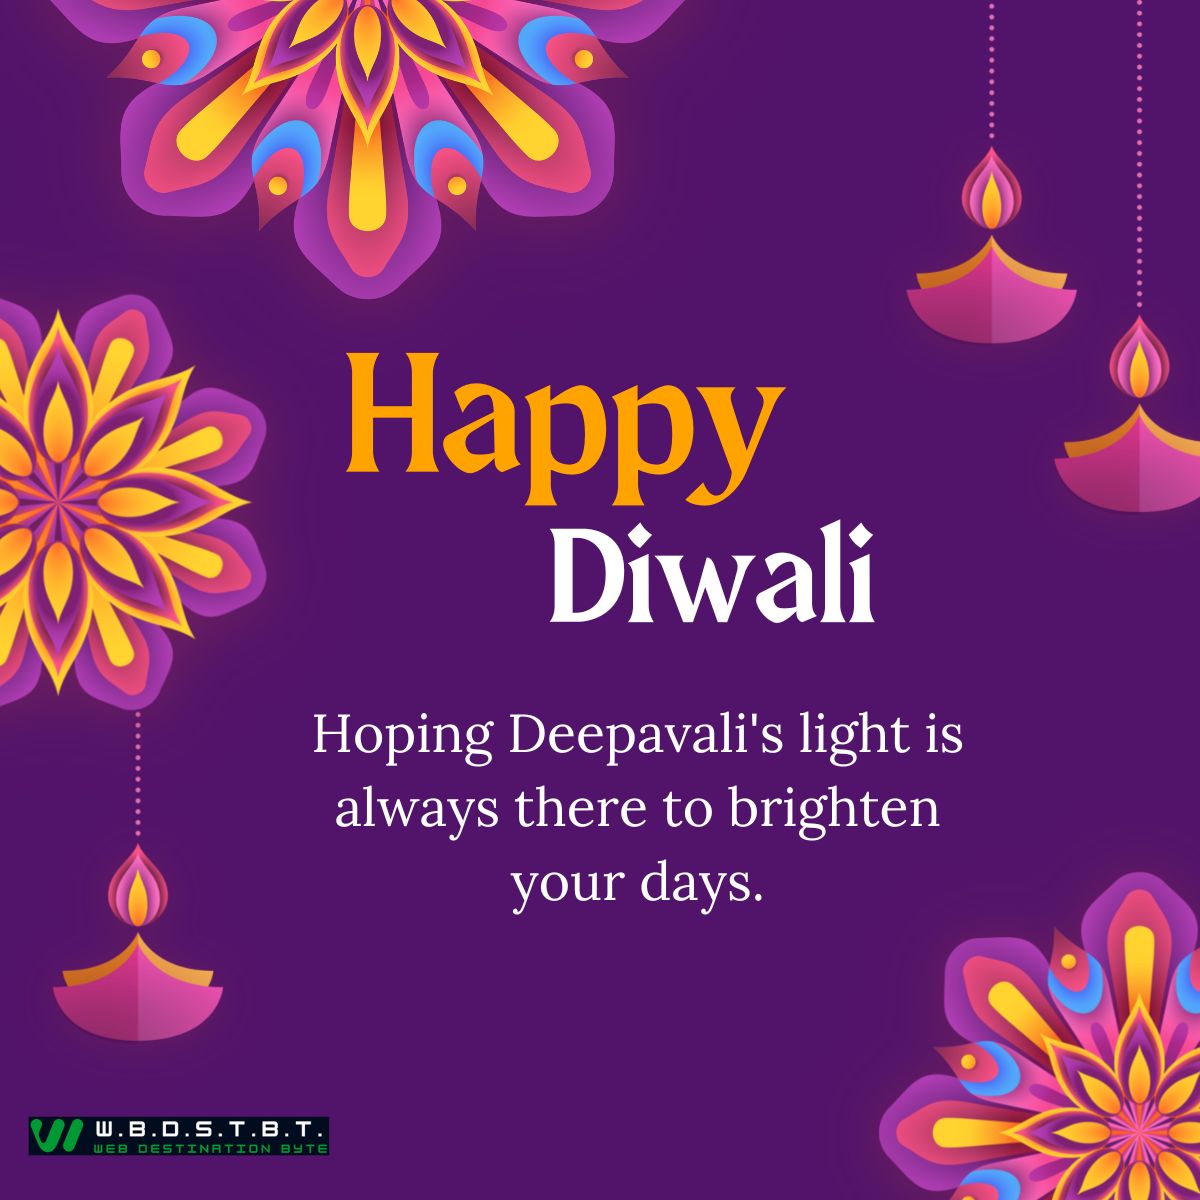 Hoping Deepavali's light is always there to brighten your days.